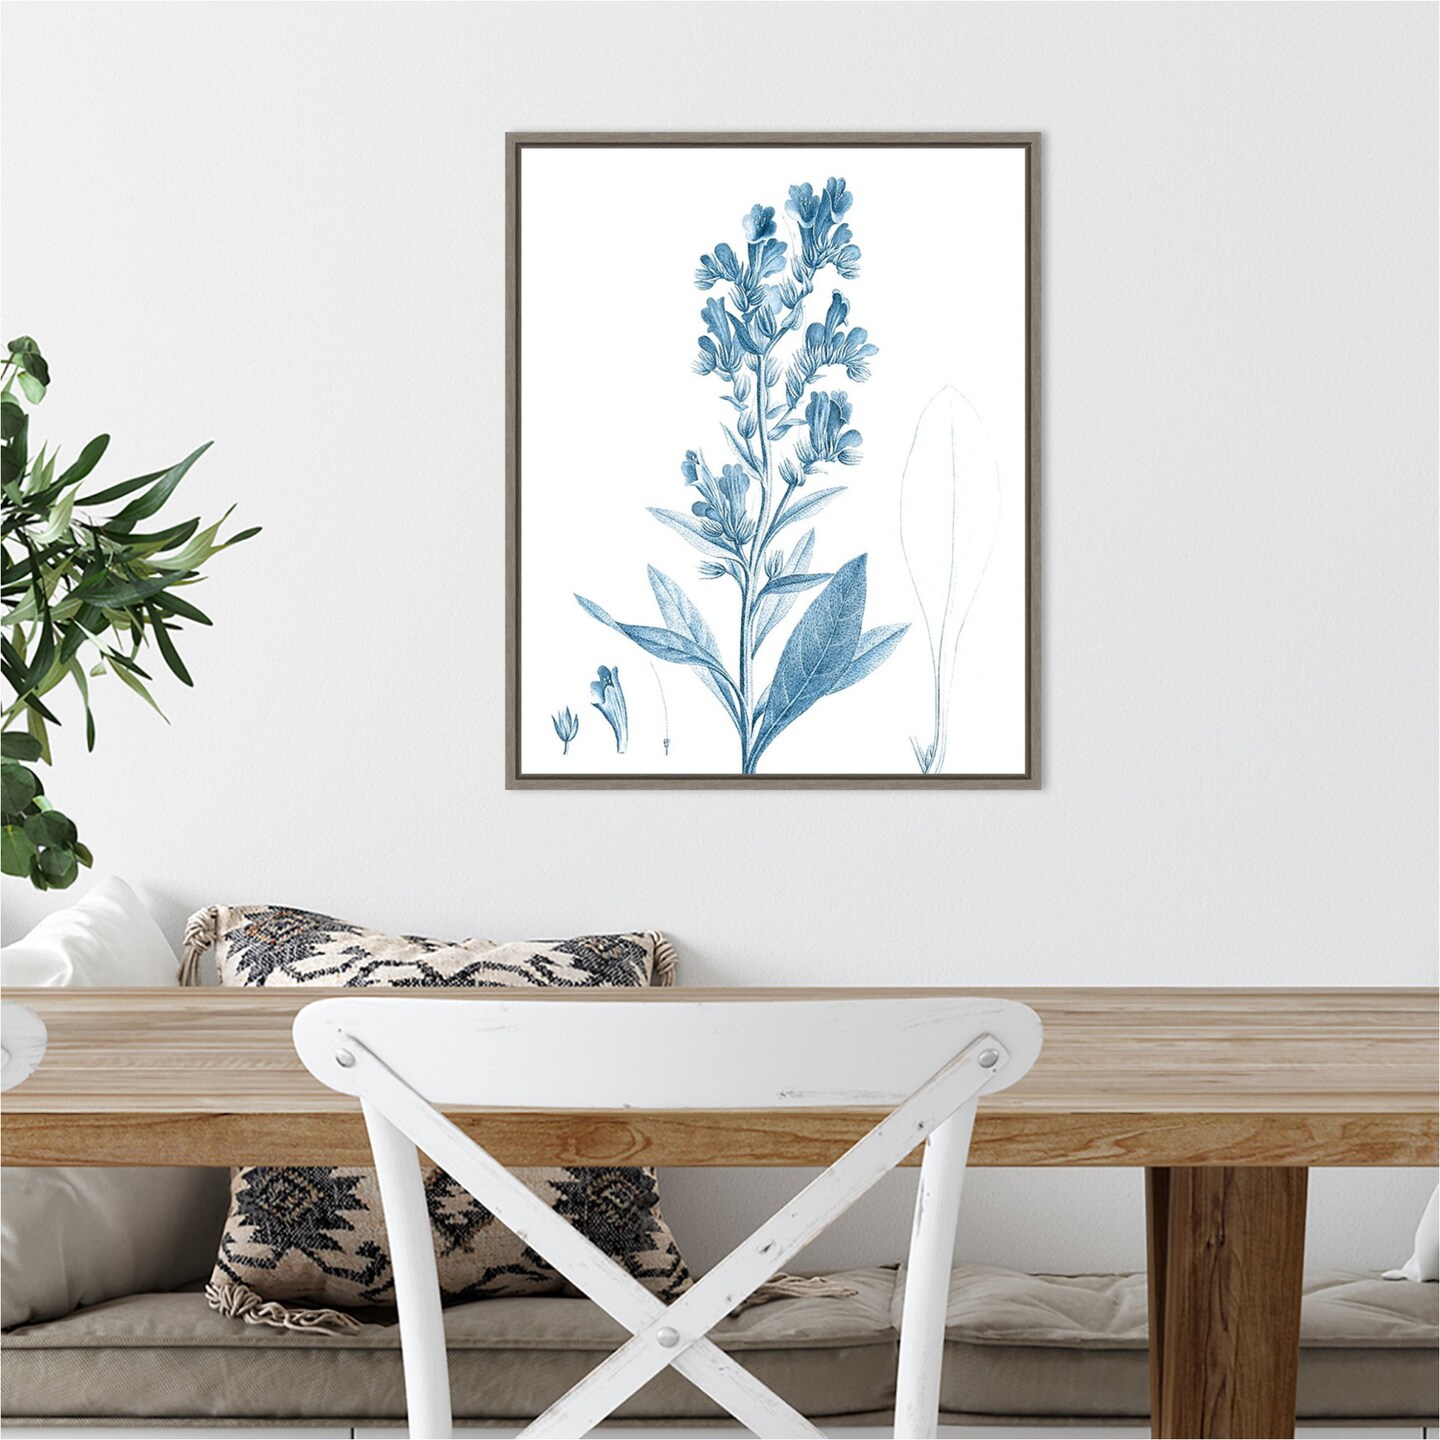 Antique Botanical in Blue III by Vision Studio 16-in. W x 20-in. H. Canvas Wall Art Print Framed in Grey